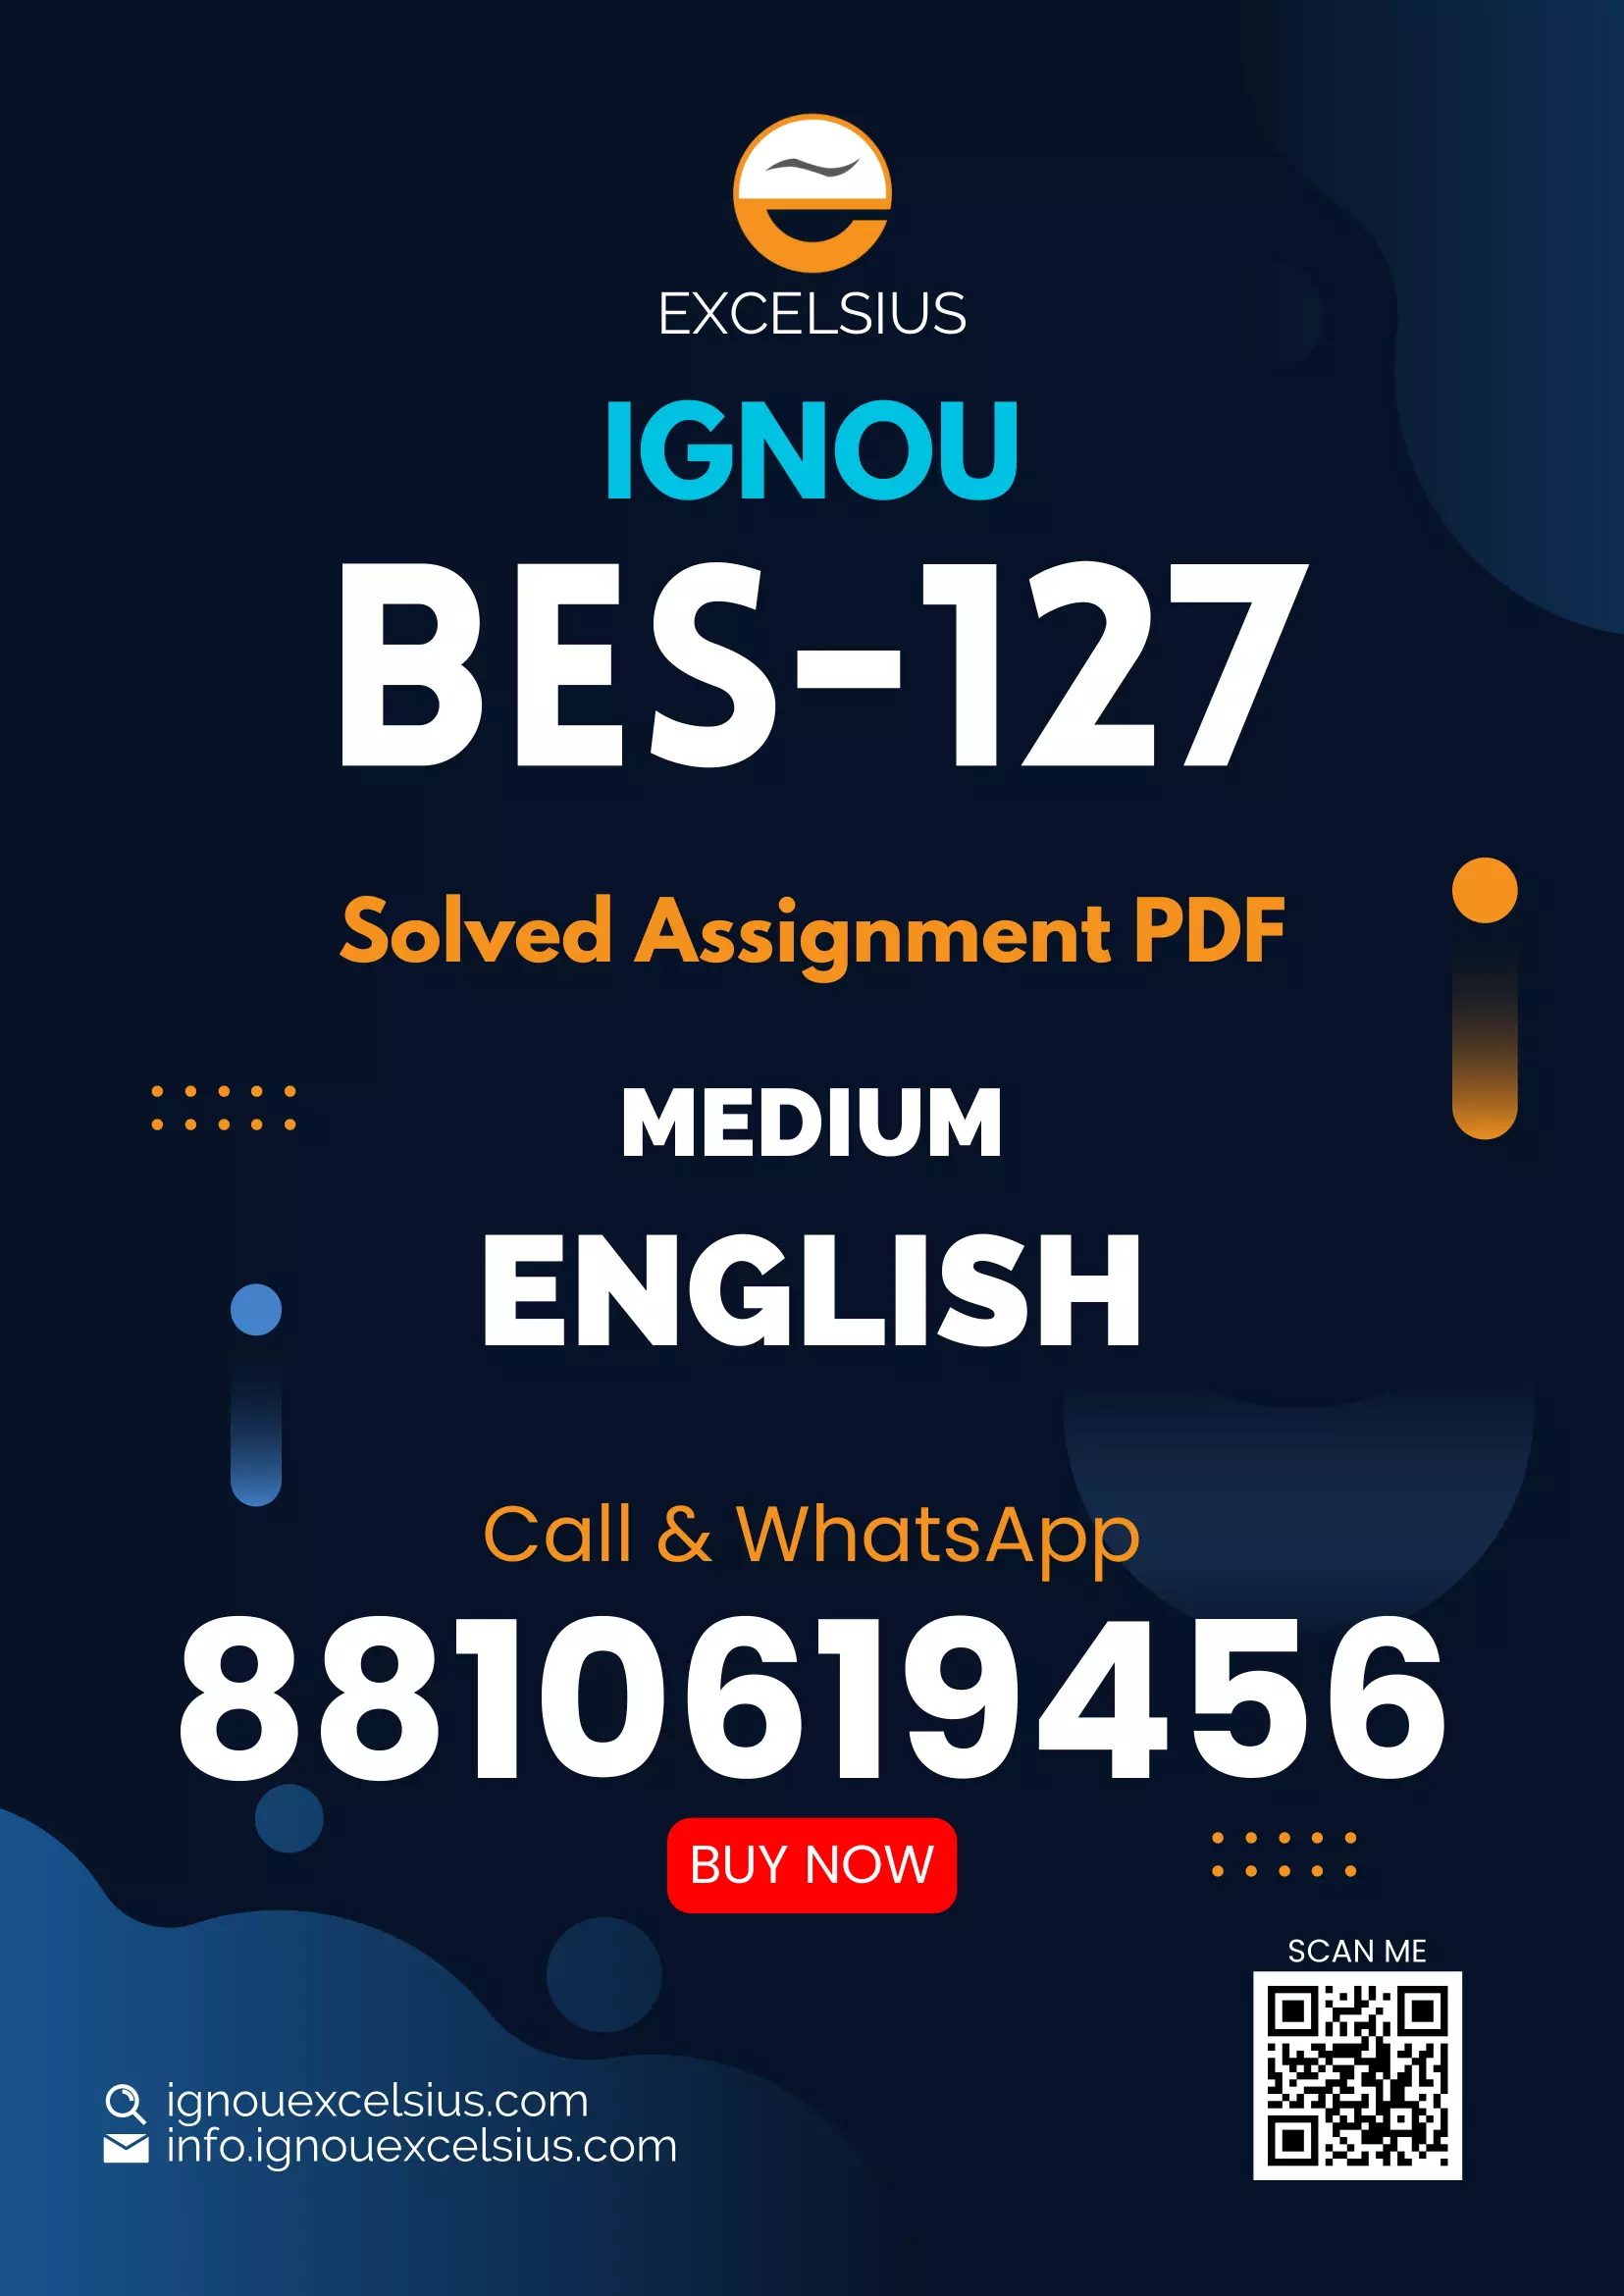 IGNOU BES-127 - Assessment for Learning, Latest Solved Assignment-January 2022